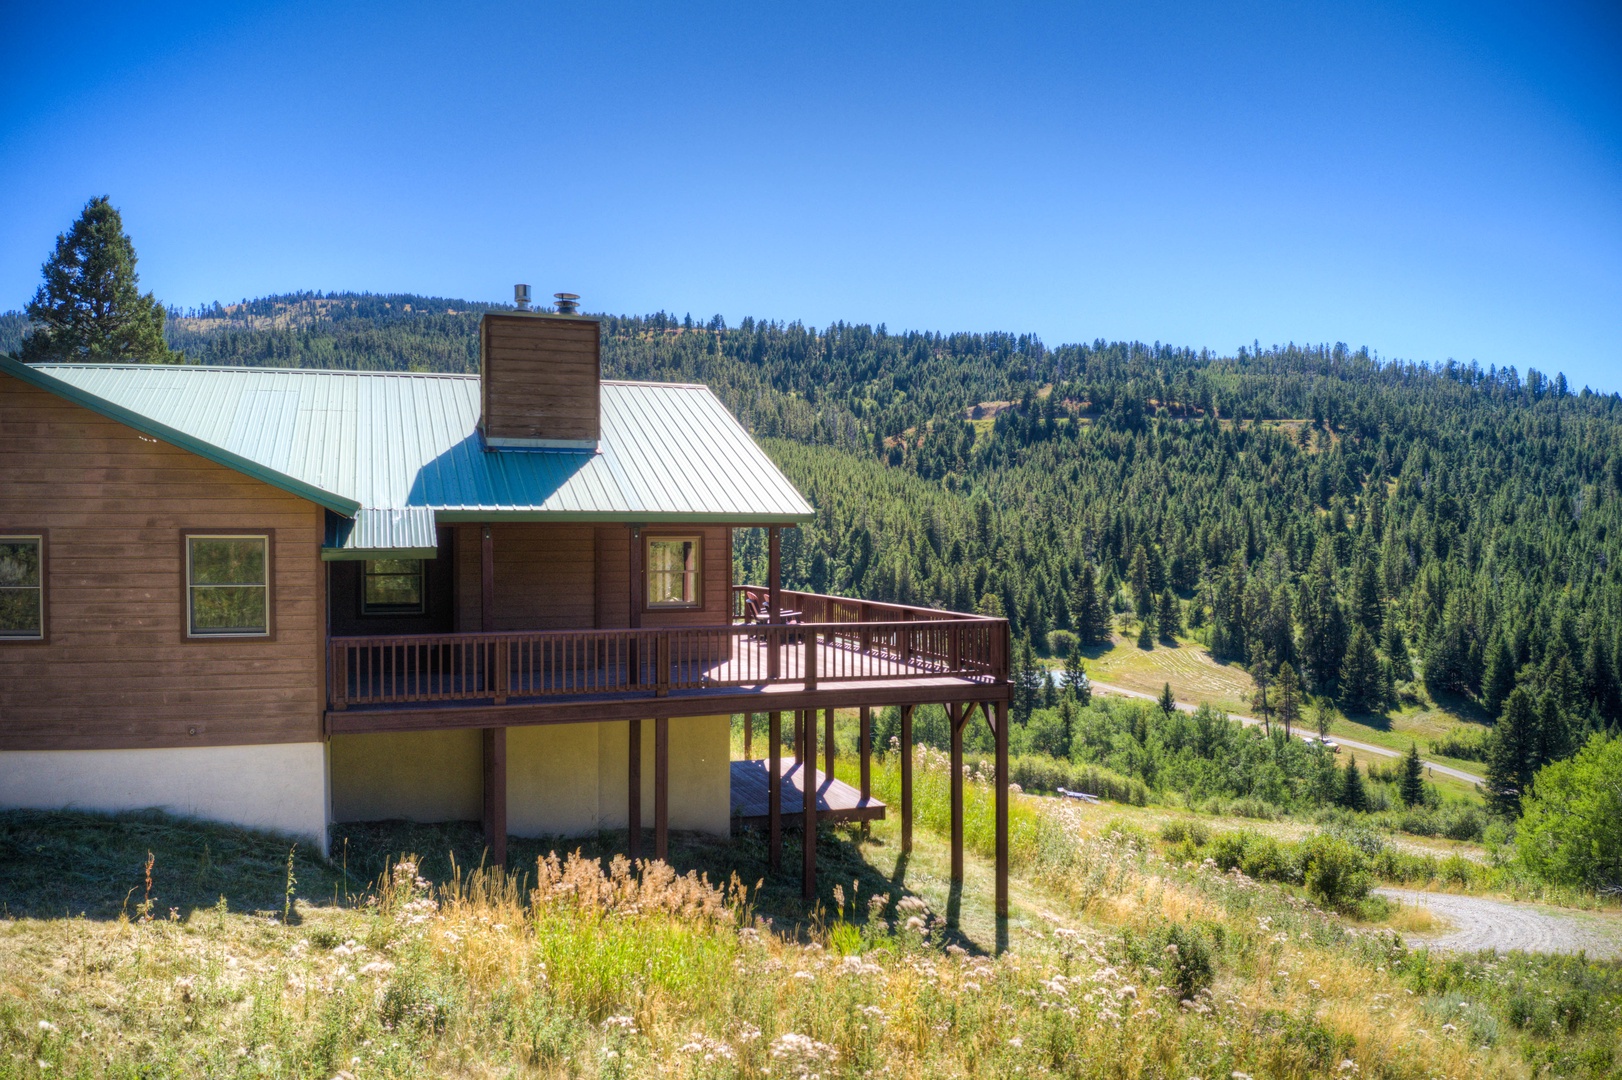 Bozeman Vacation Rentals, The Canyon Lookout - The decks keep going and going